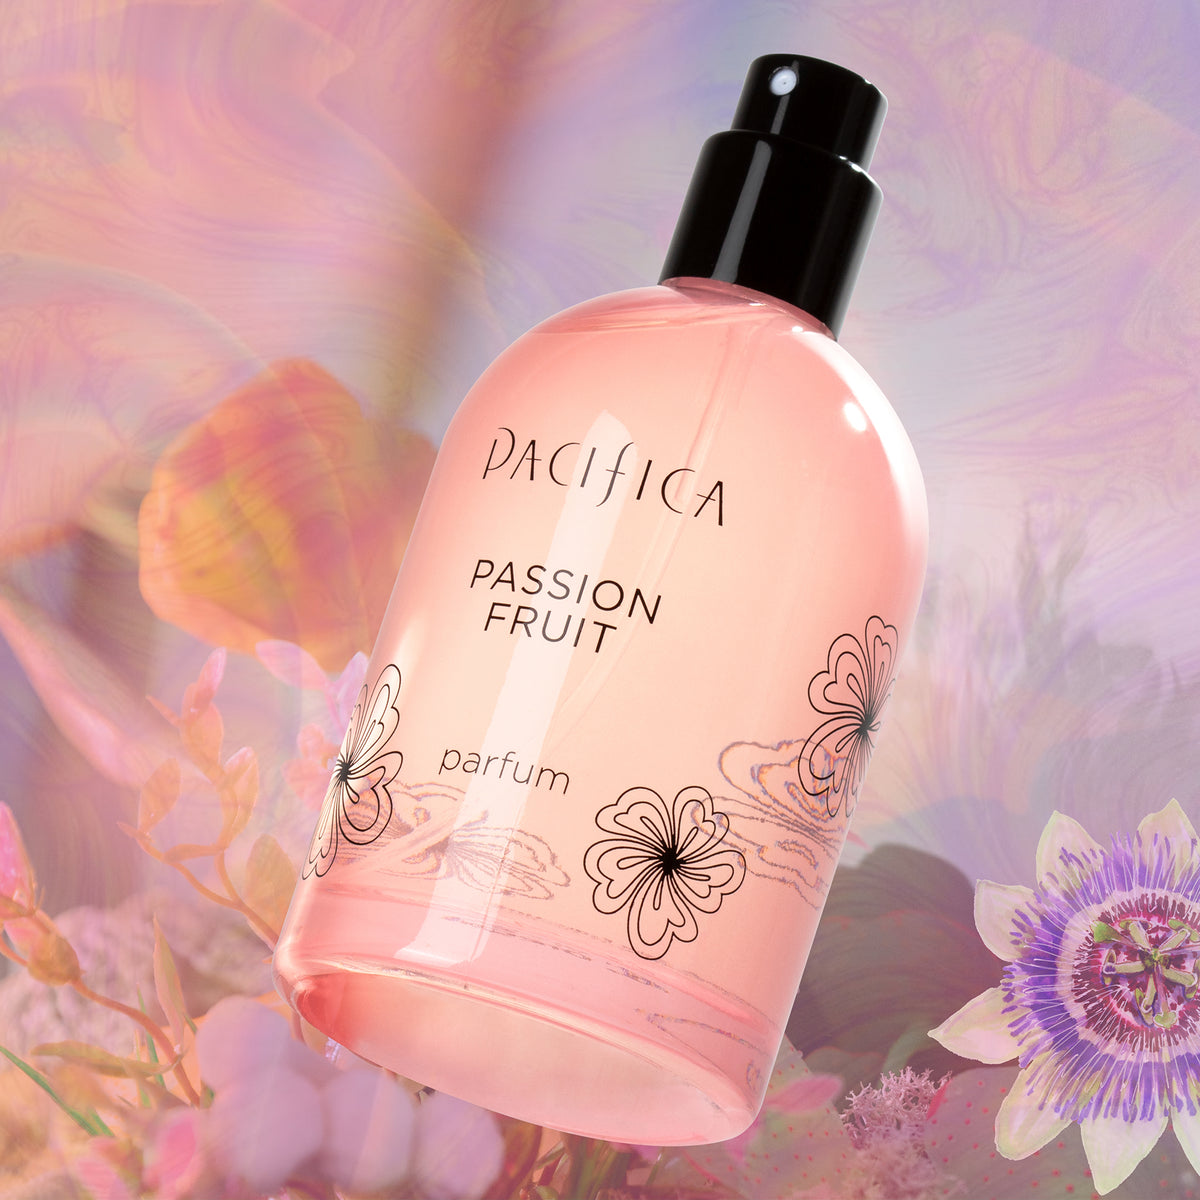 Passionfruit Soleil Spray Perfume - Fragrance - Pacifica Beauty